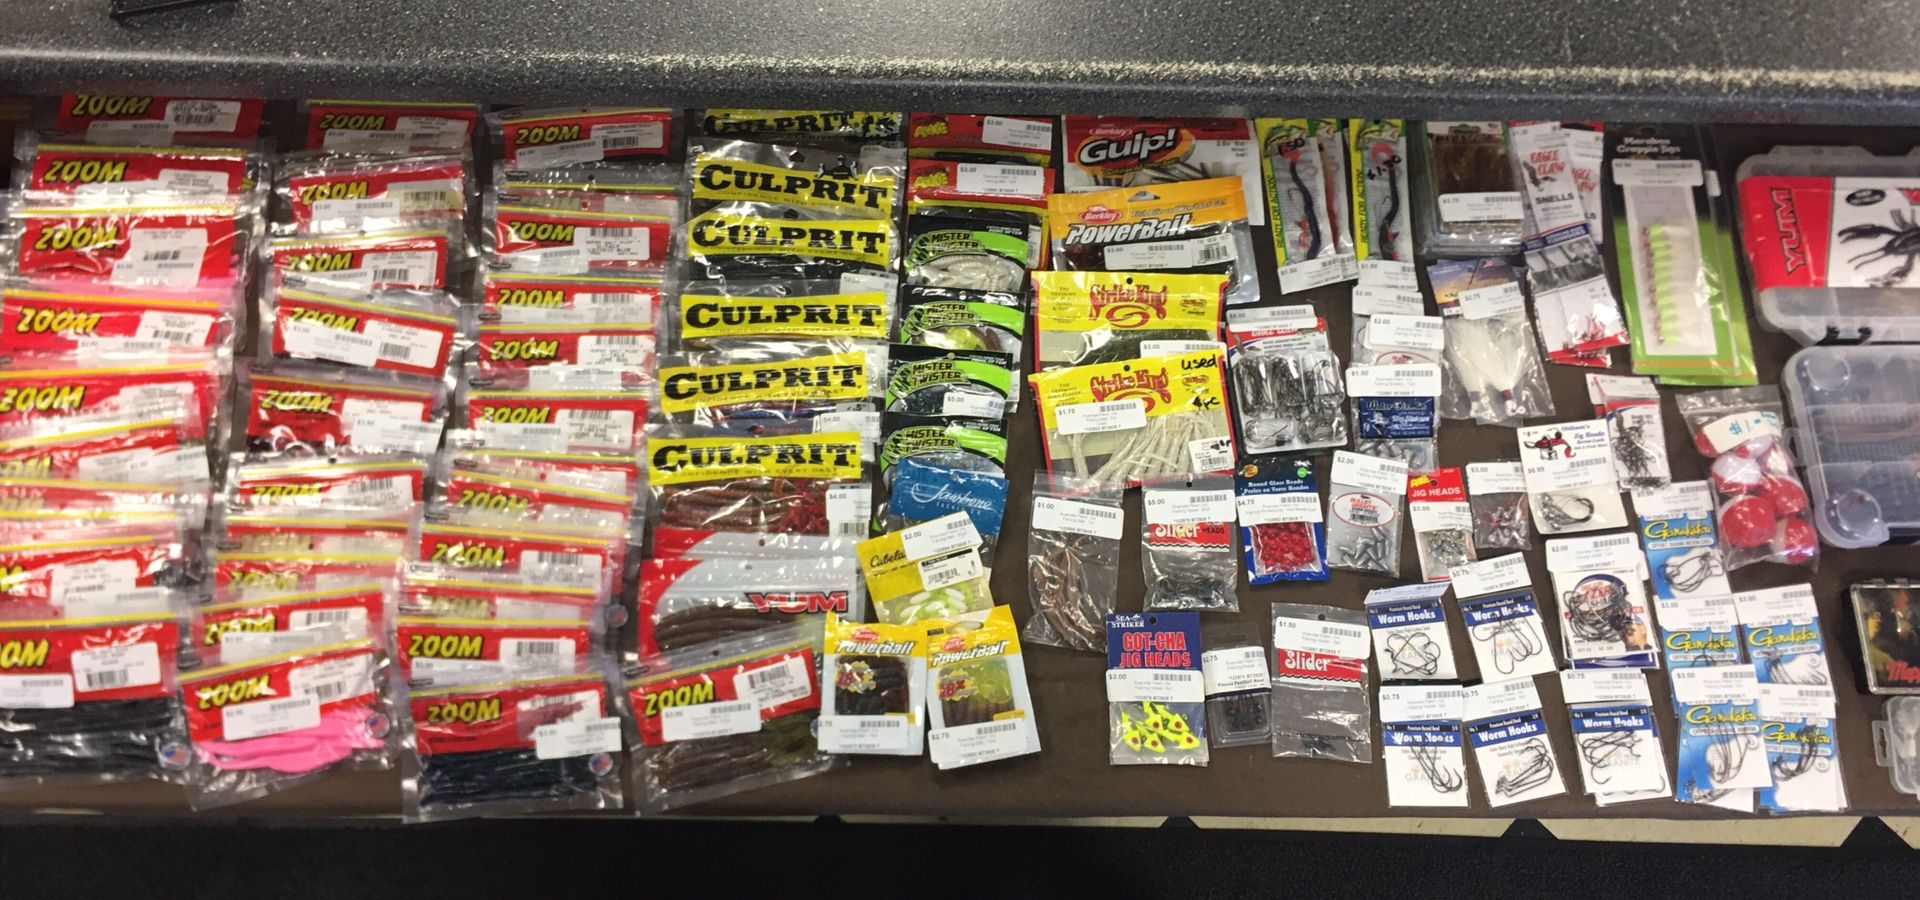 FISHING Bait and Tackle for SALE - READ POST!